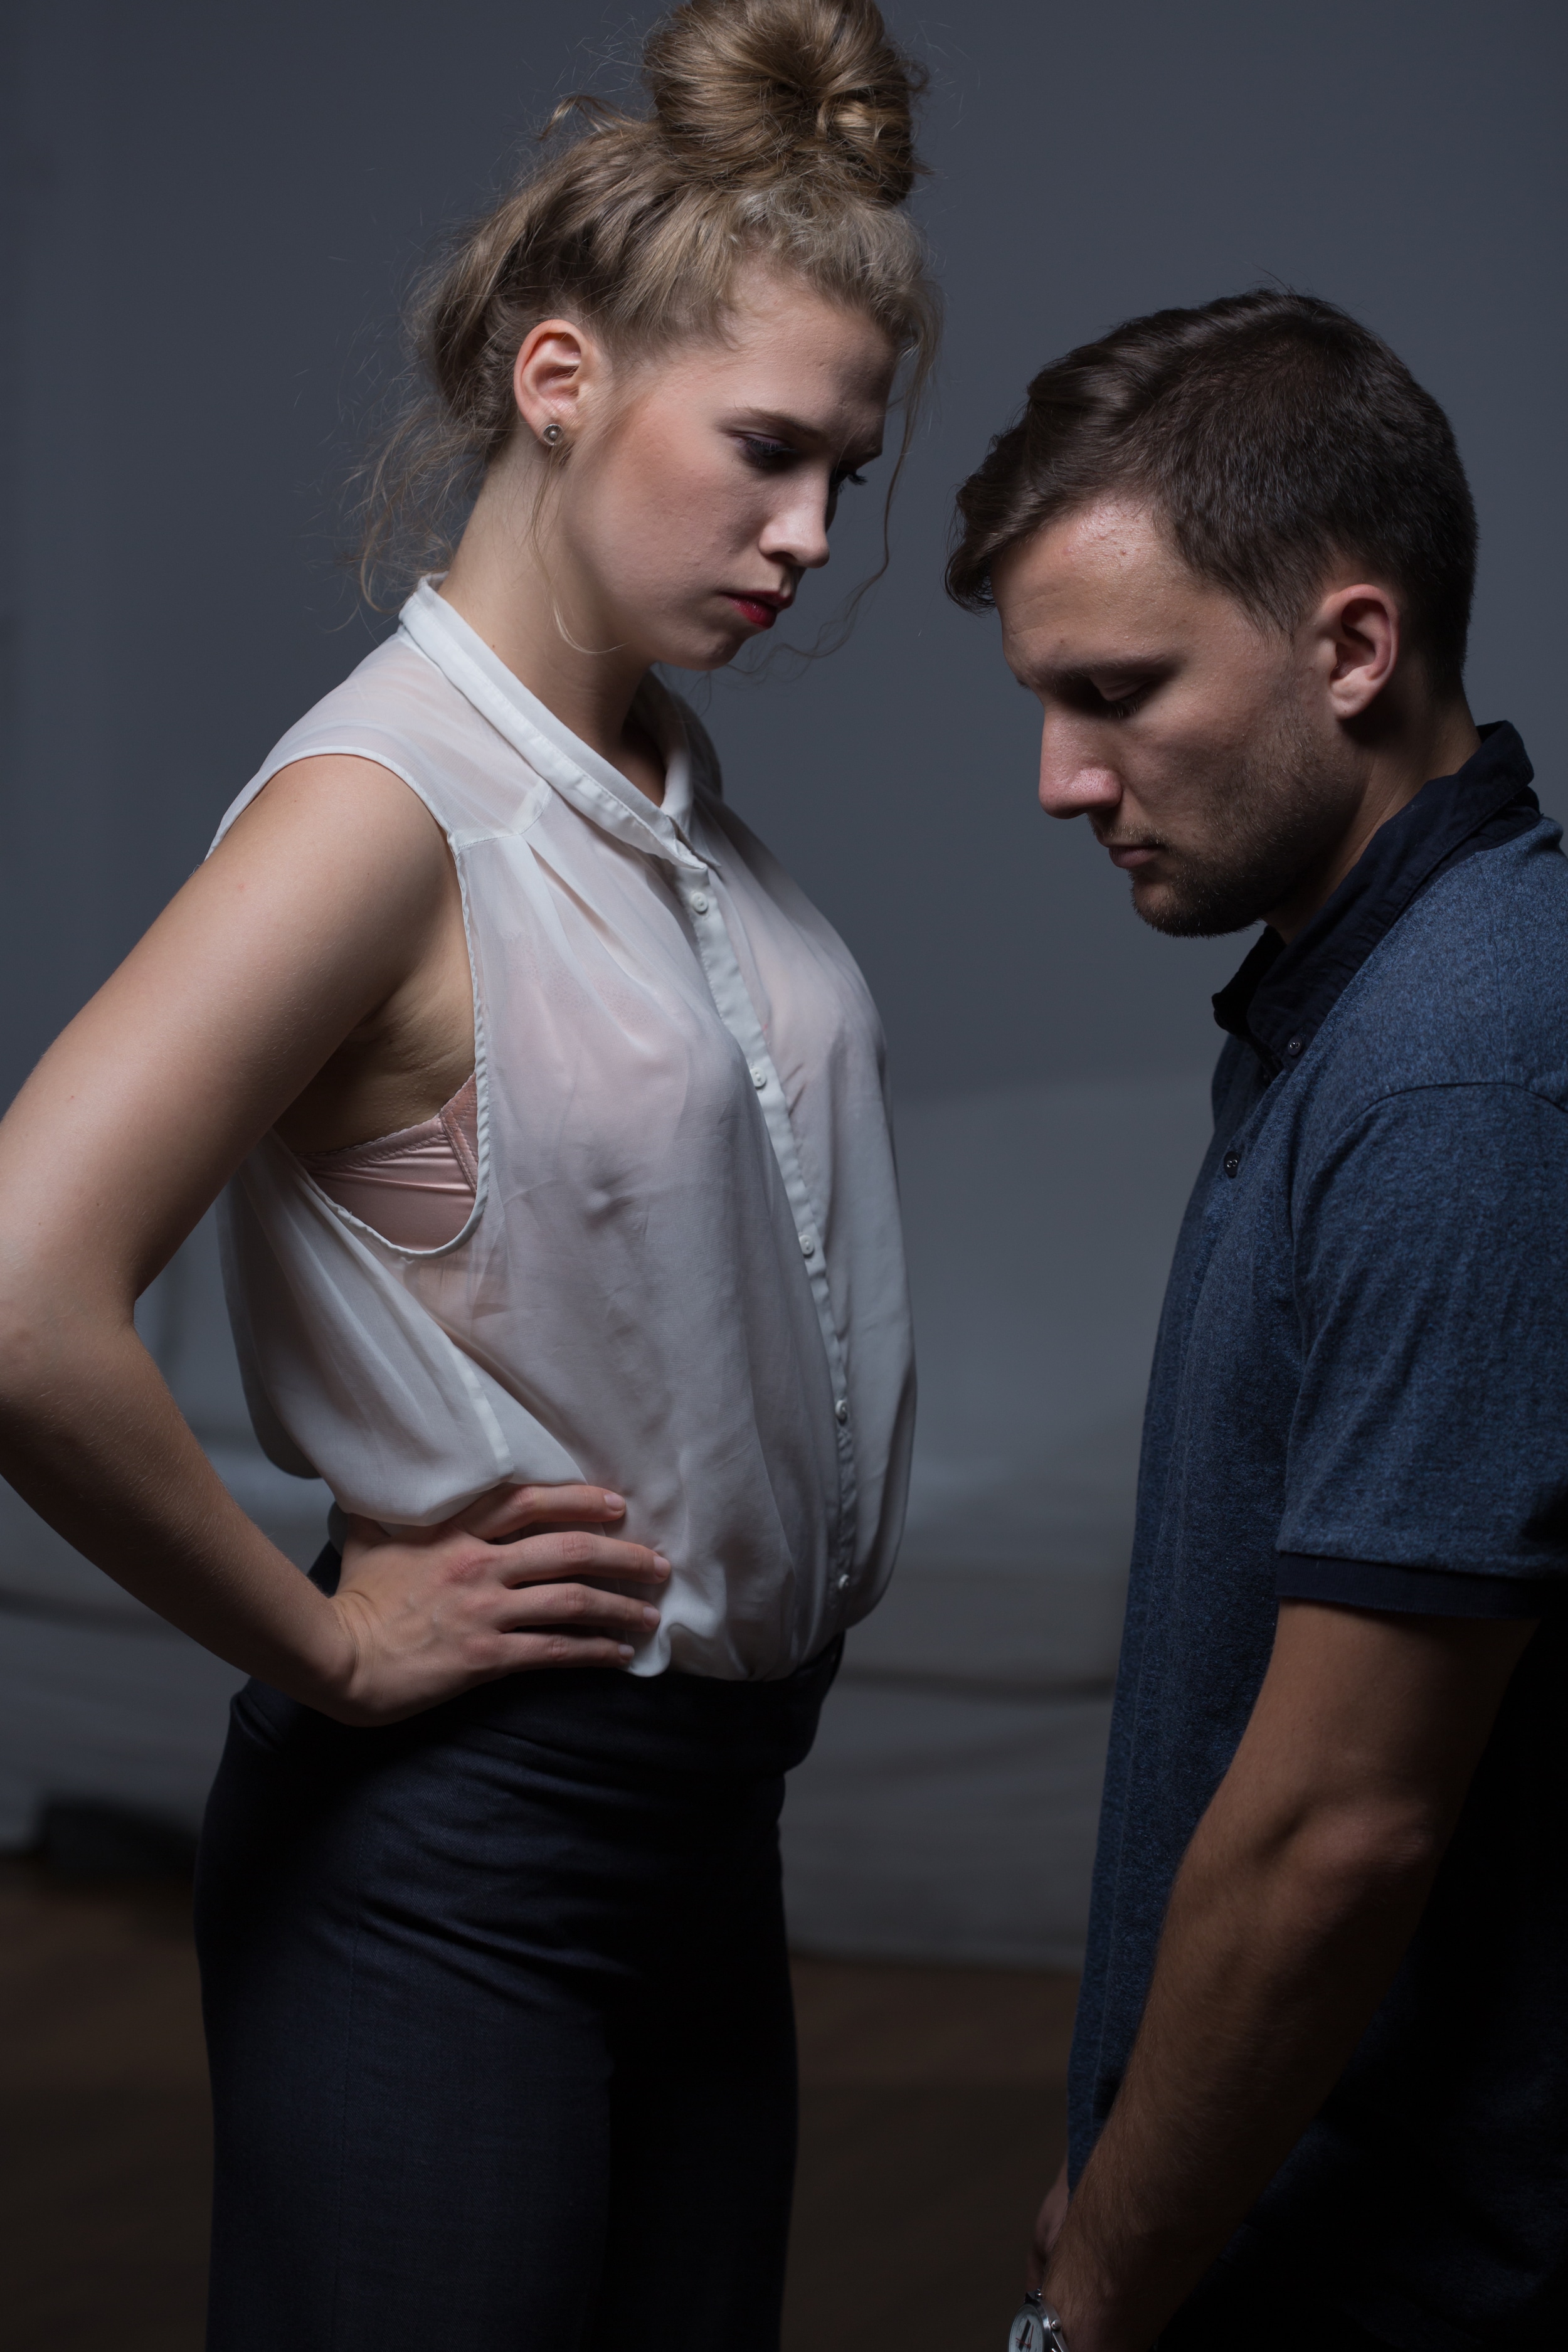 7 Signs Your Ex Girlfriend Probably Wants You Back